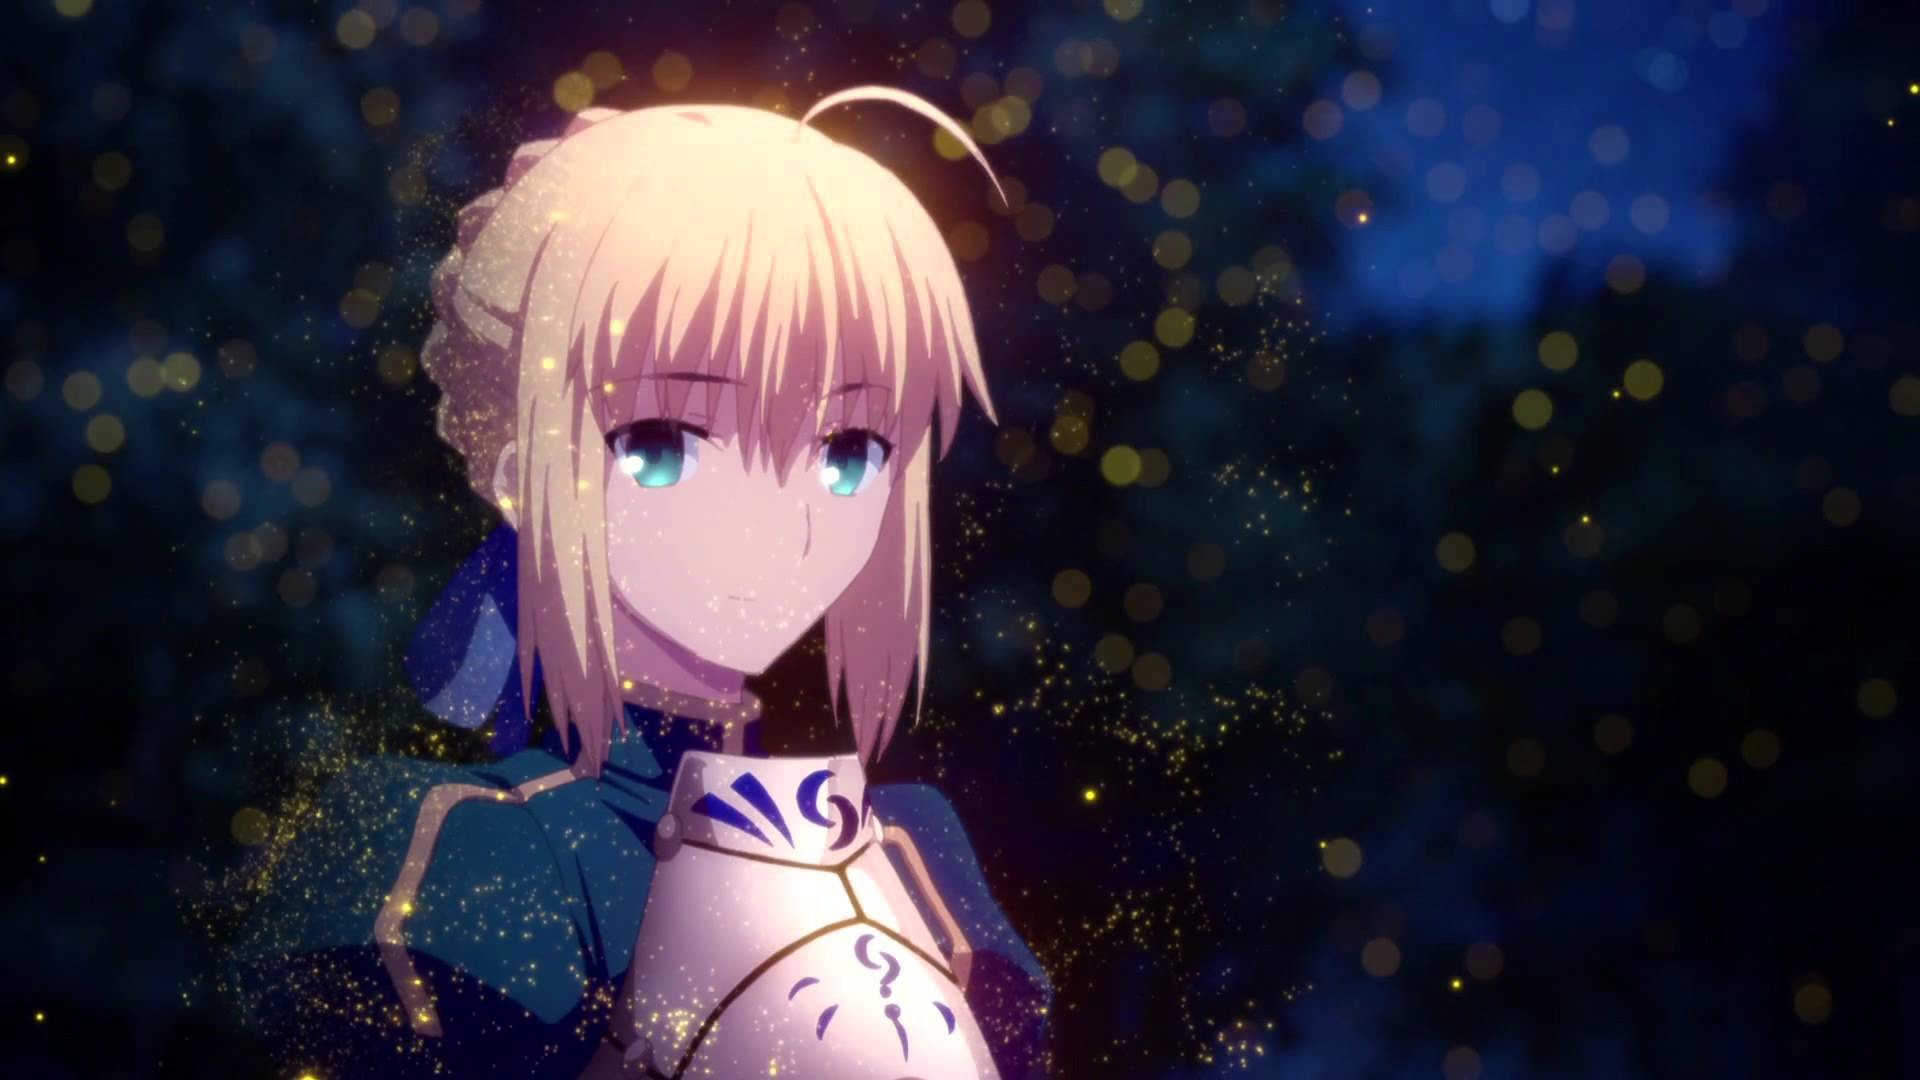 1920x1080 Fate/stay night: [Unlimited Blade Works] OST II - #01 Sorrow UBW Extended -  YouTube